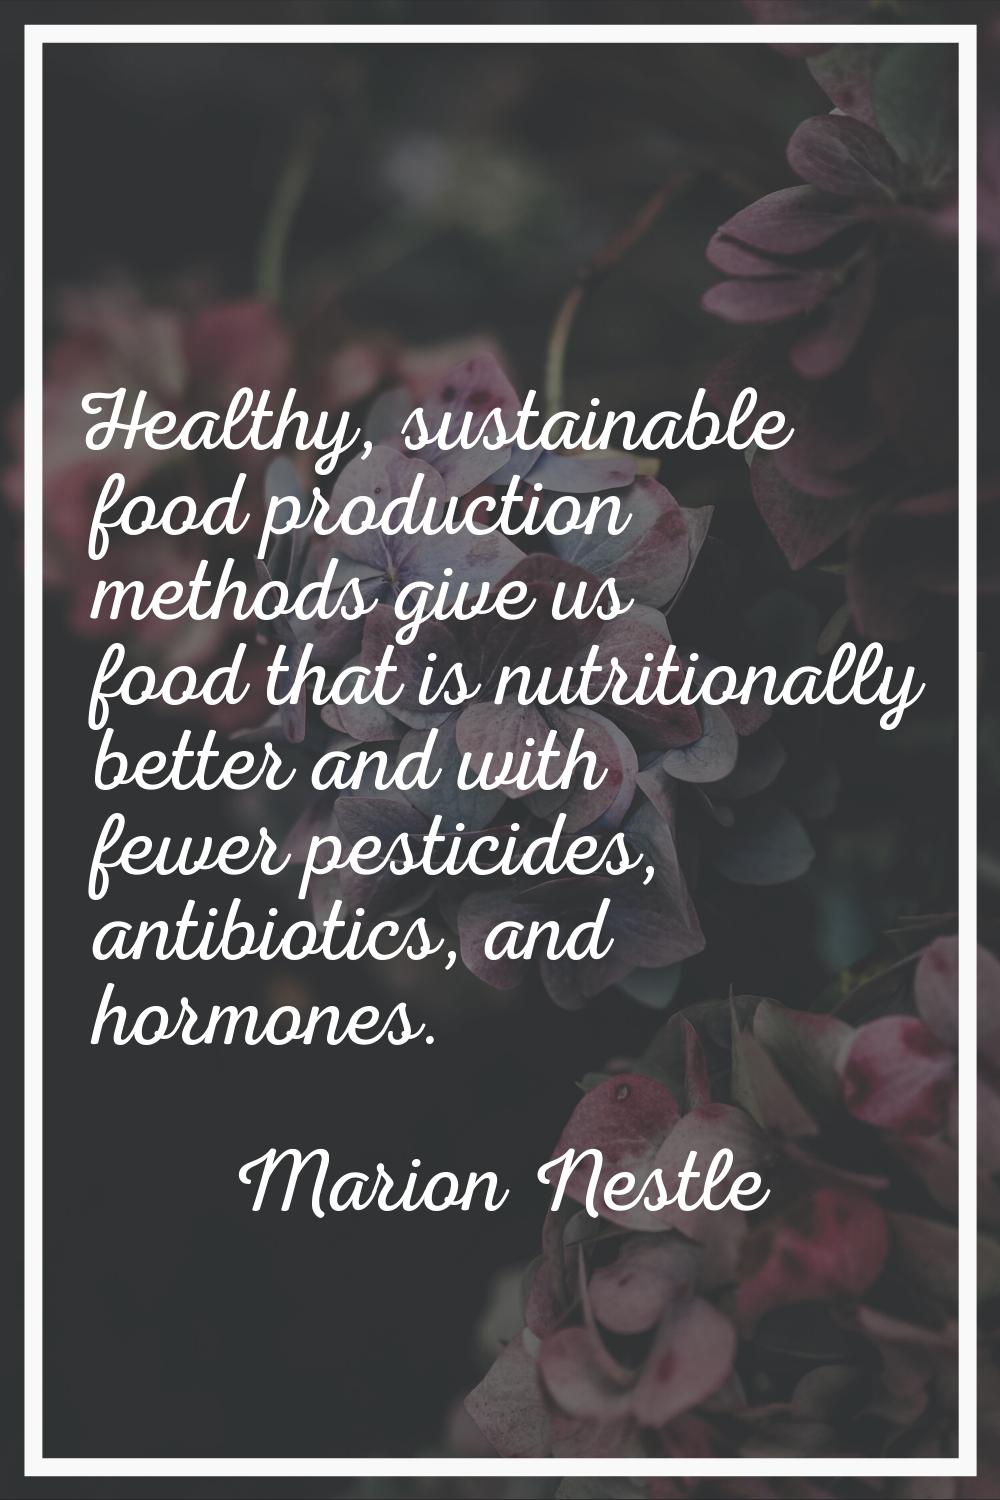 Healthy, sustainable food production methods give us food that is nutritionally better and with few